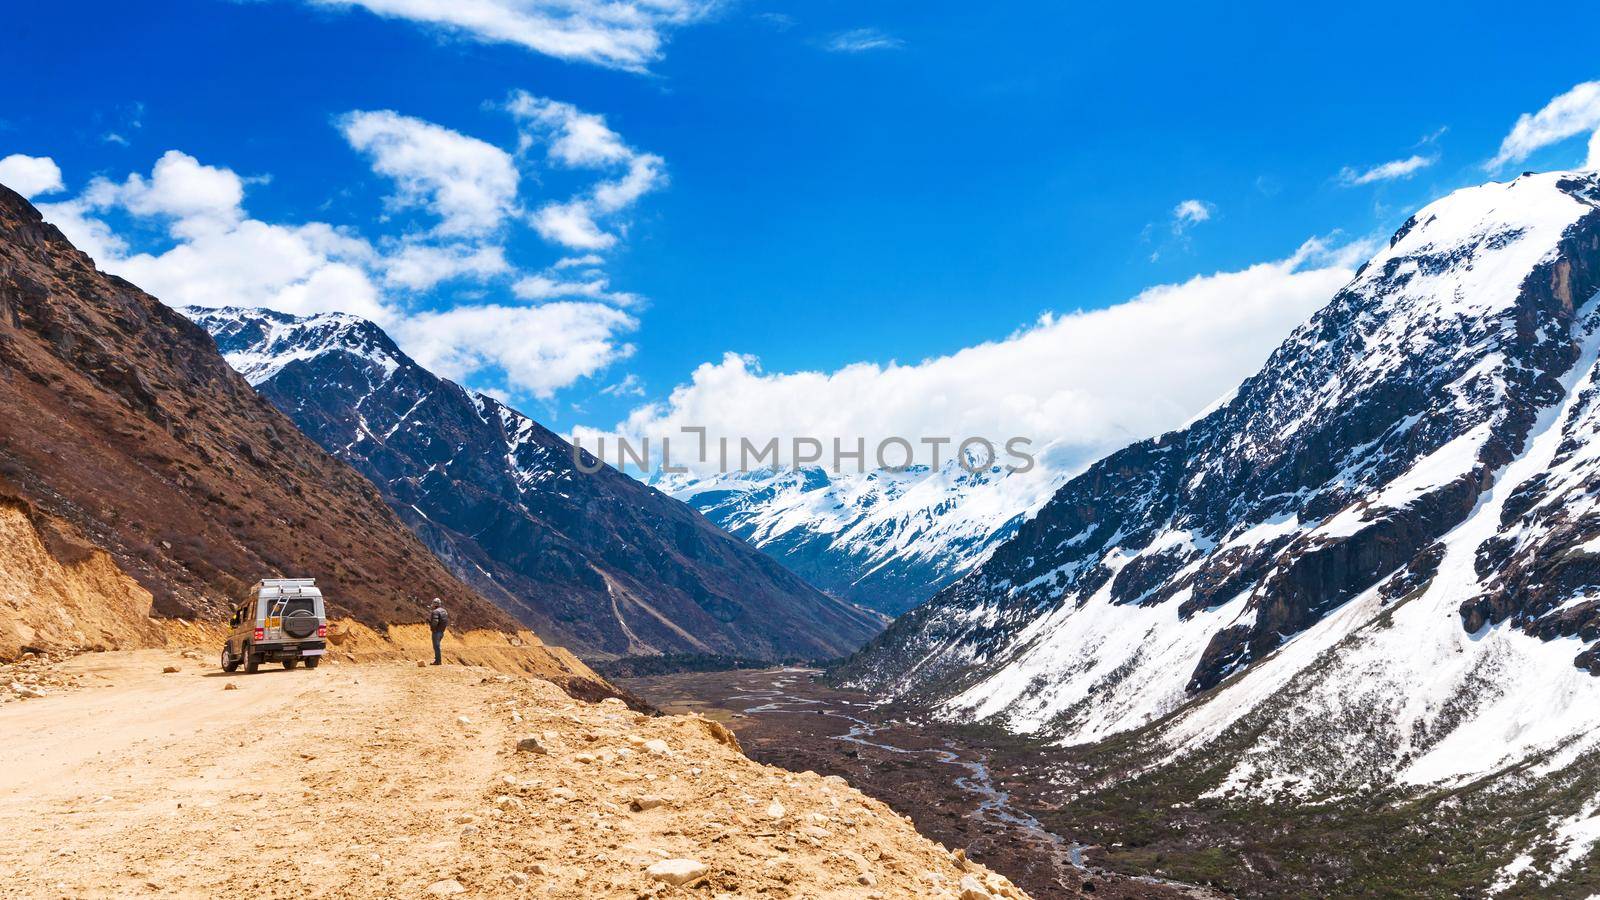 Beautiful landscape of Chopta valley with Snow covered beautiful mountain peaks against the blue sky at north Sikkim India